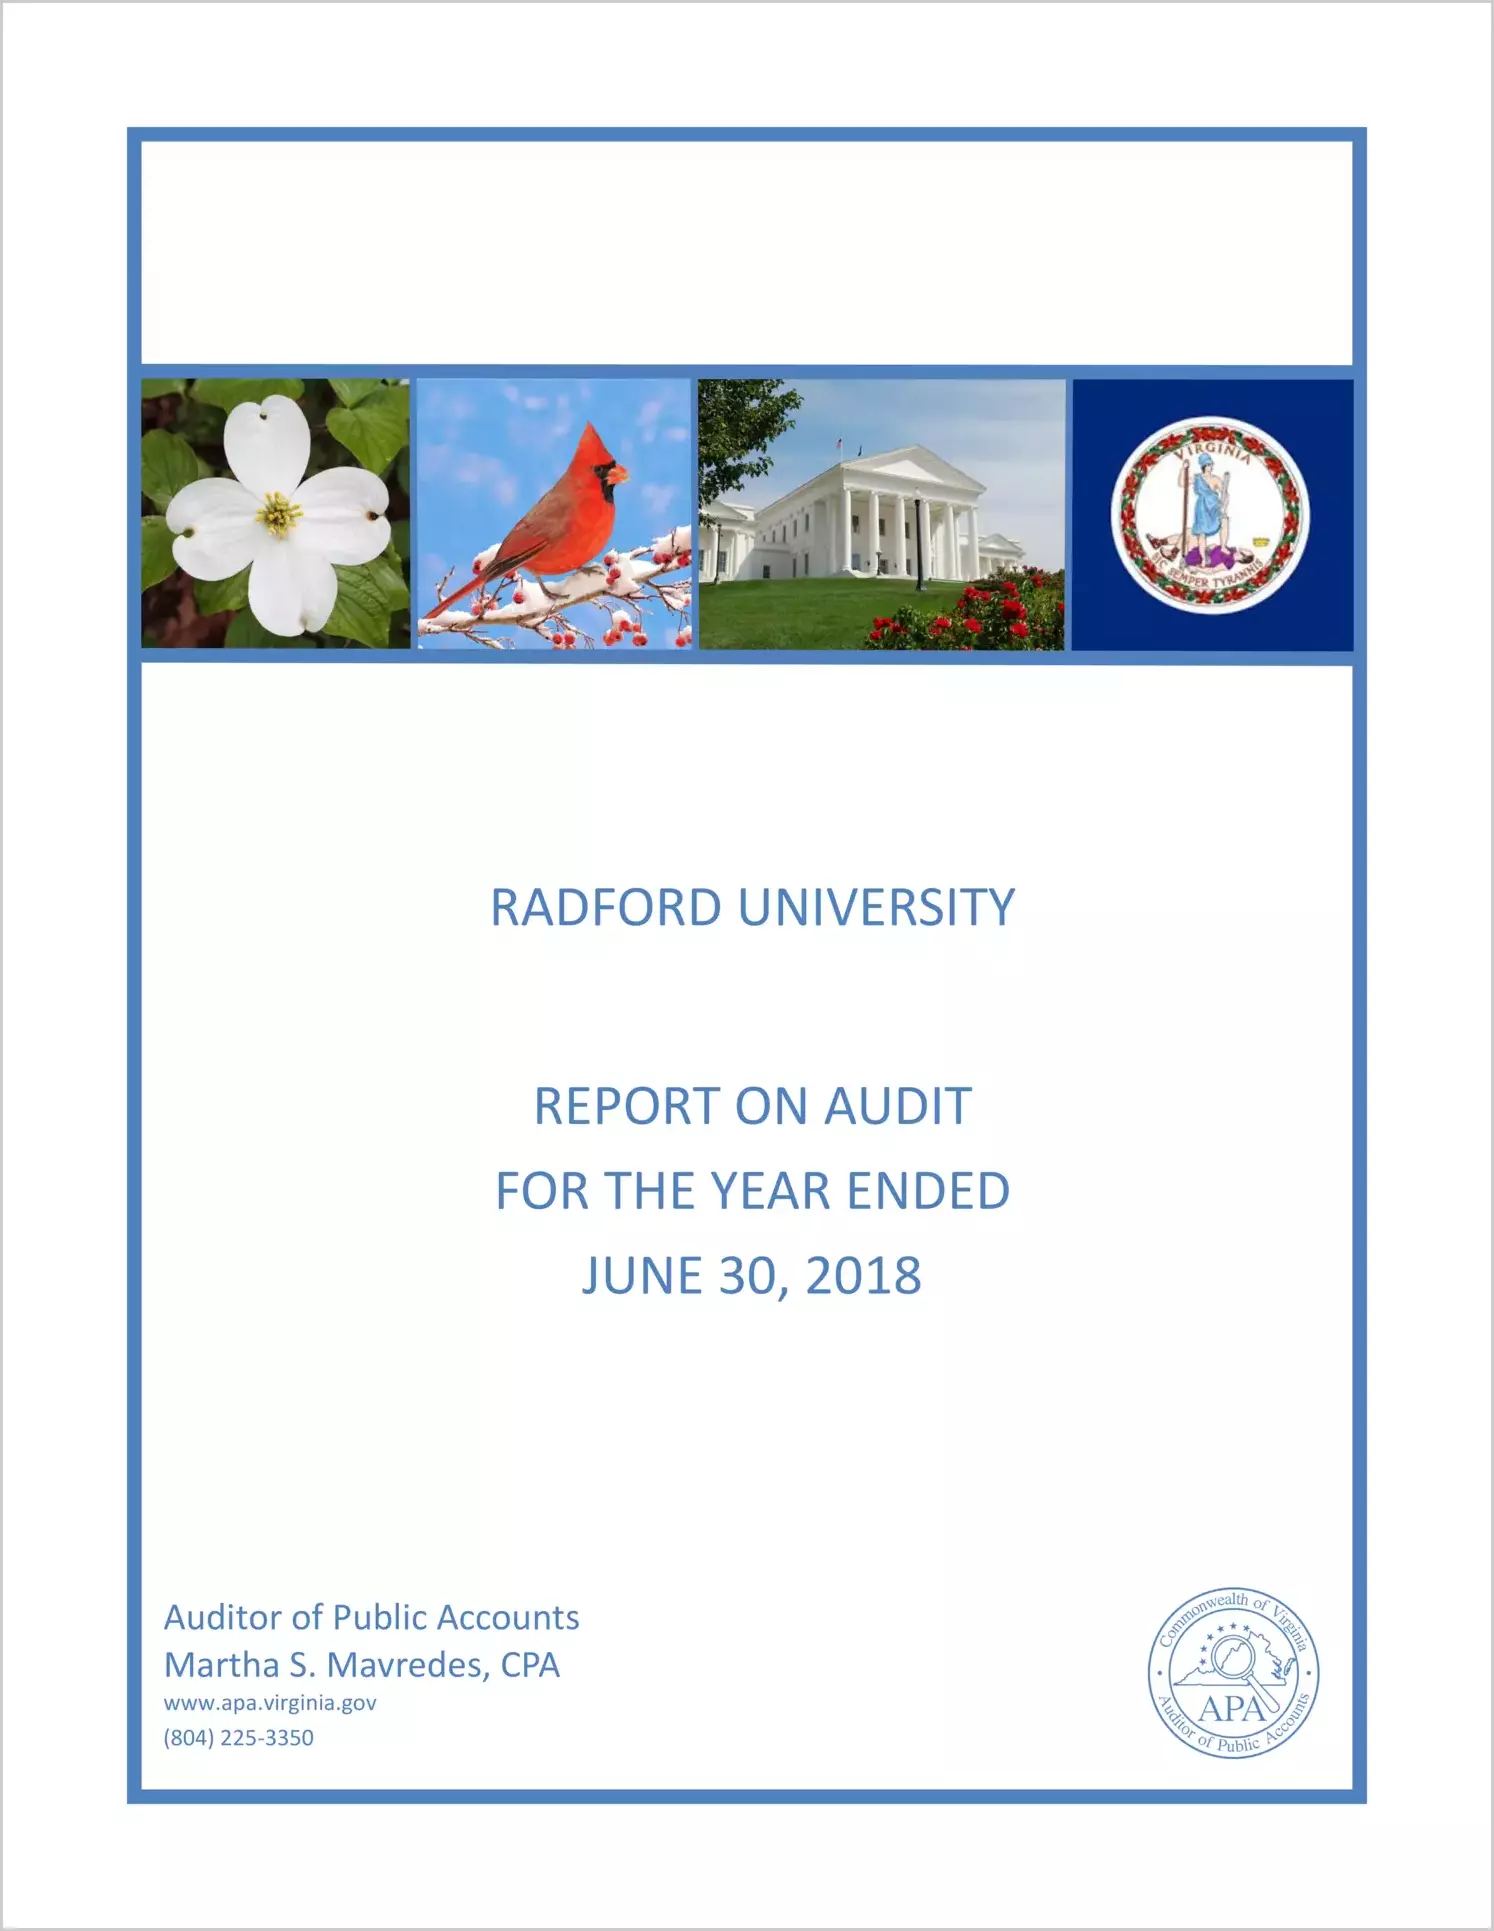 Radford University for the year ended June 30, 2018